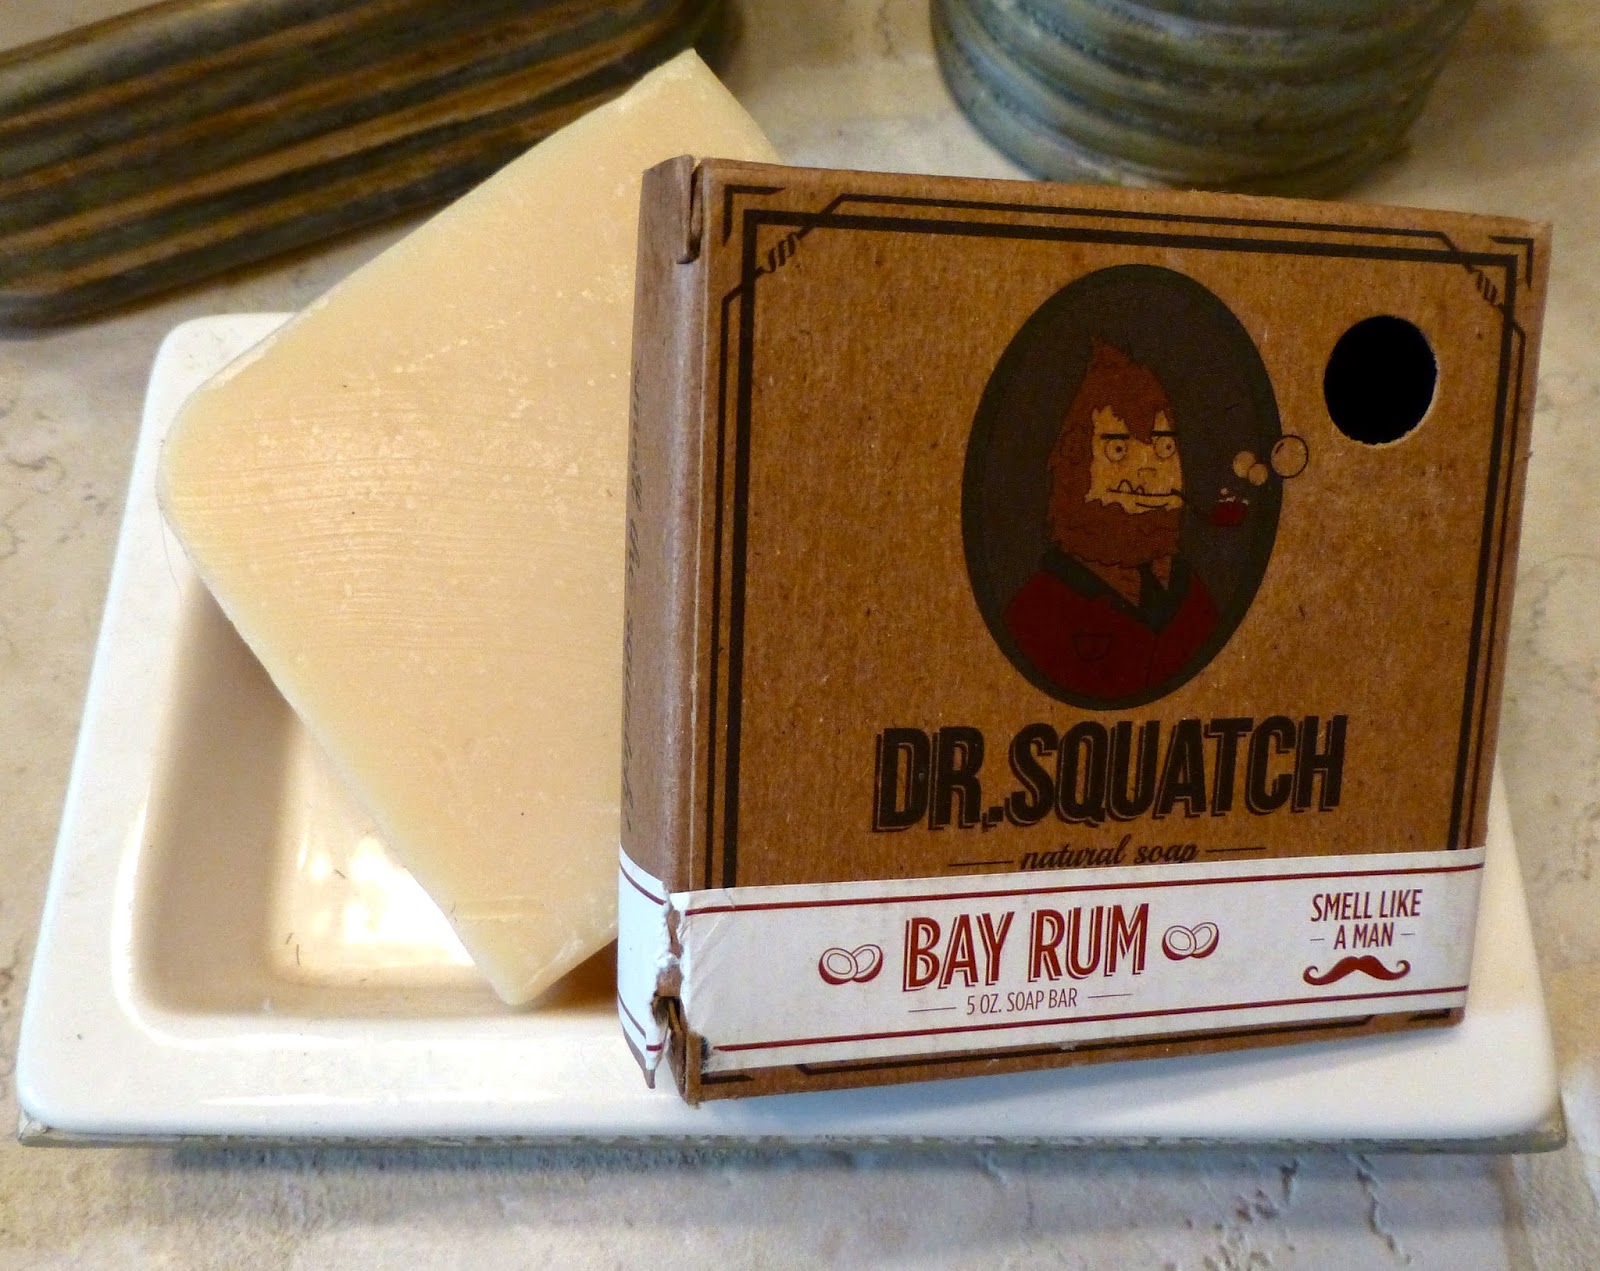 The Dr. Squatch Men's Soap Is Natural and Smells Amazing